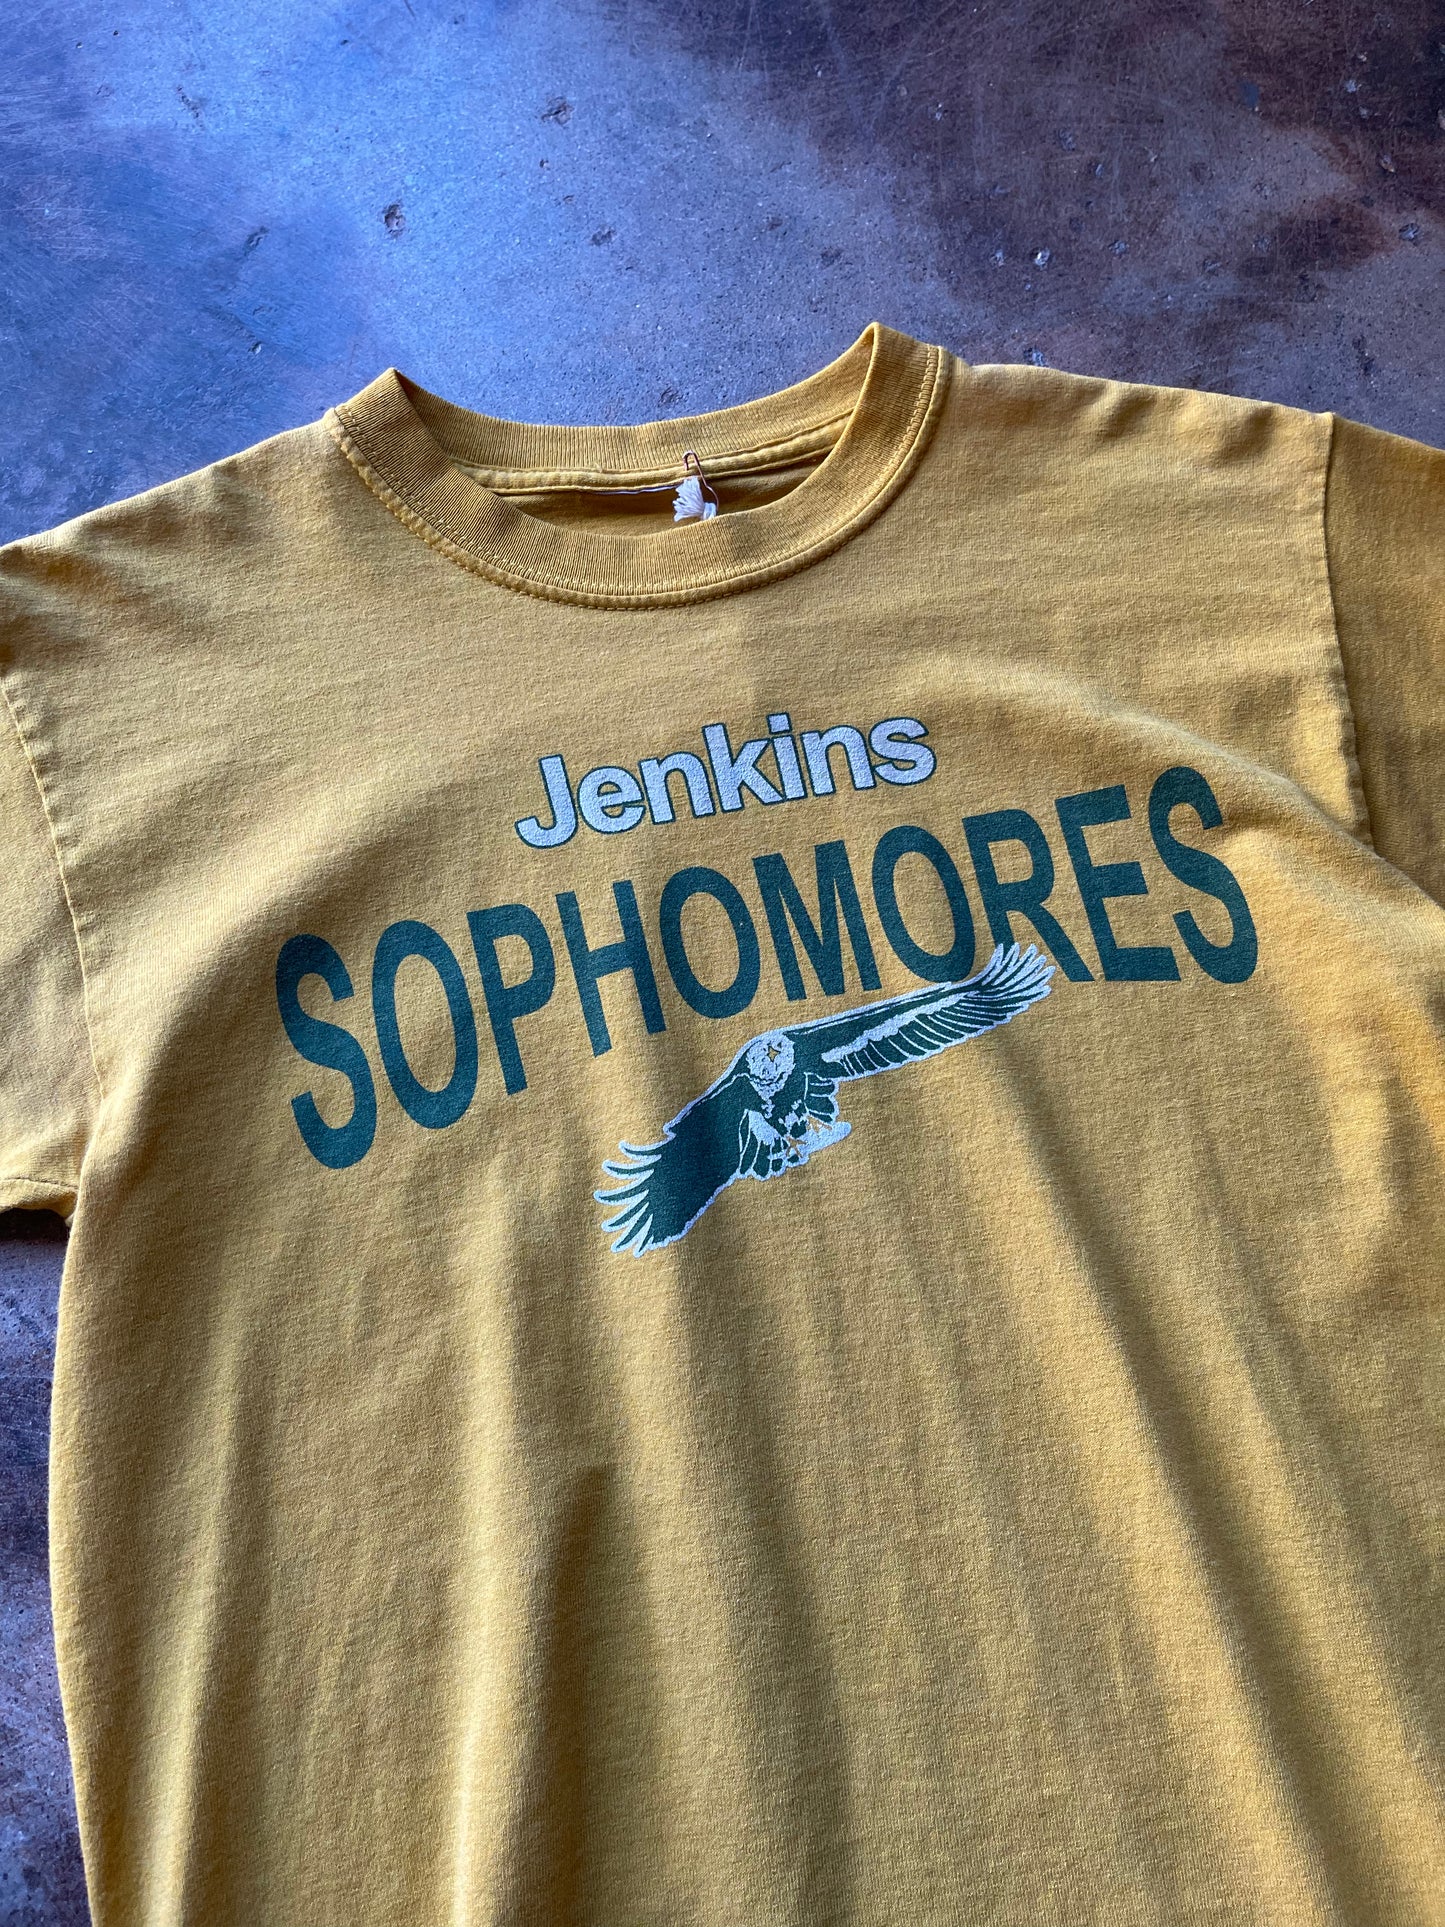 Vintage Jenkins Sophomores Tee | Small